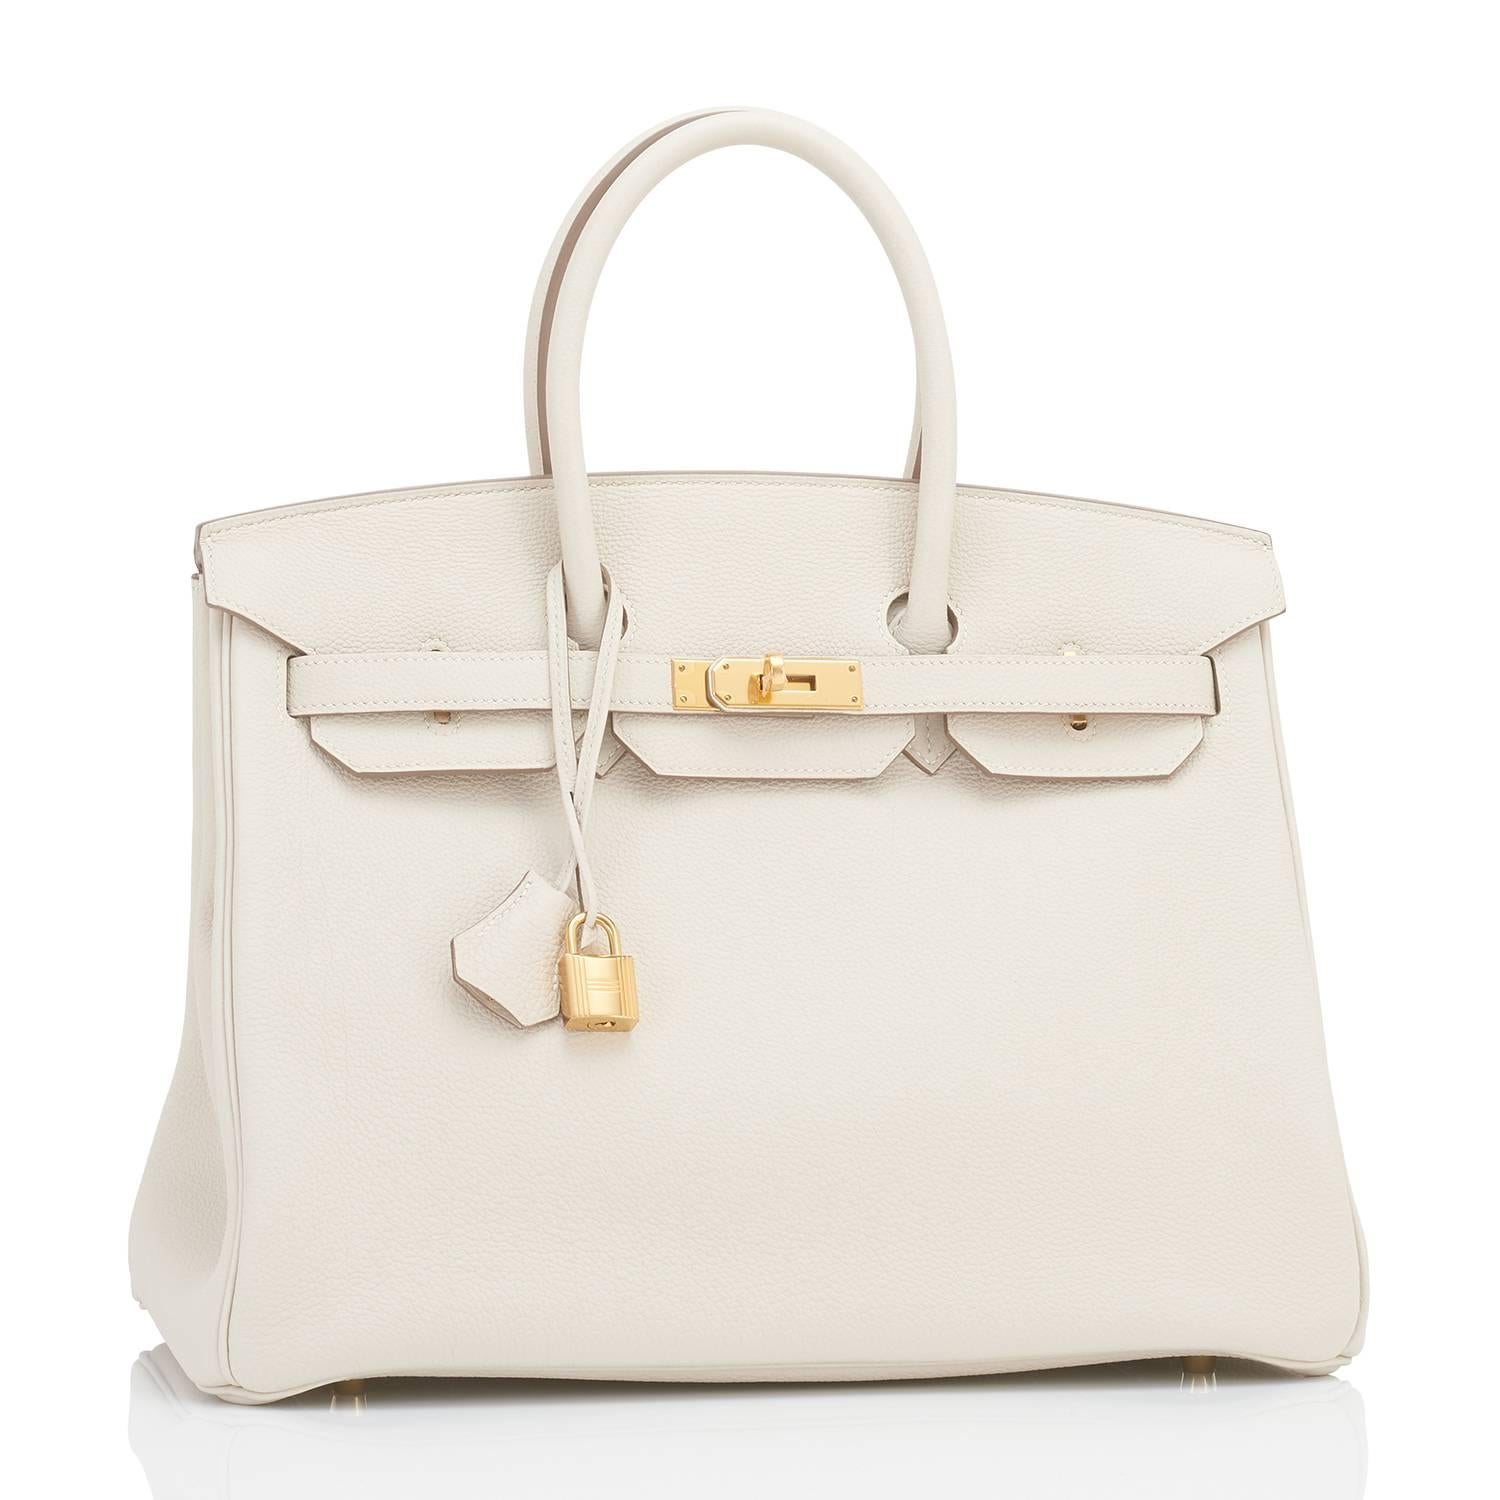 Hermes Craie Chalk Off White 35cm Togo Birkin Gold Hardware
Brand New in Box. Store fresh. Pristine Condition (plastic on hardware.) 
This Birkin was a VIP order, and bears the coveted Horse Shoe Stamp!
Perfect gift! Comes in full set with lock,